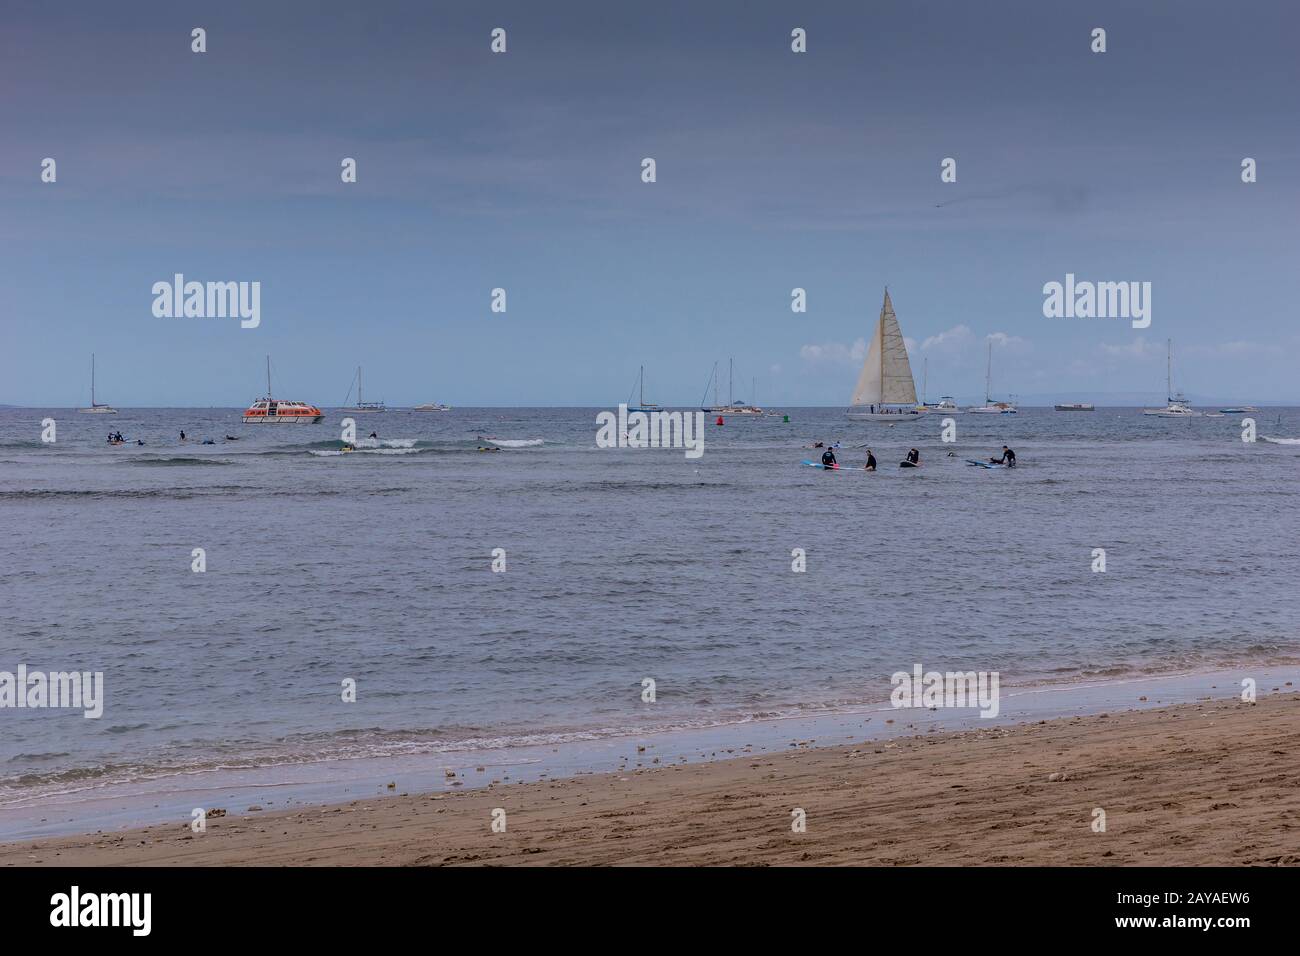 Lahaina, Maui, Hawaii, USA. - January 12 2012: Off sand beach, view over blueish ocean with surfers, swimmers and sail boats under blue sky. Stock Photo